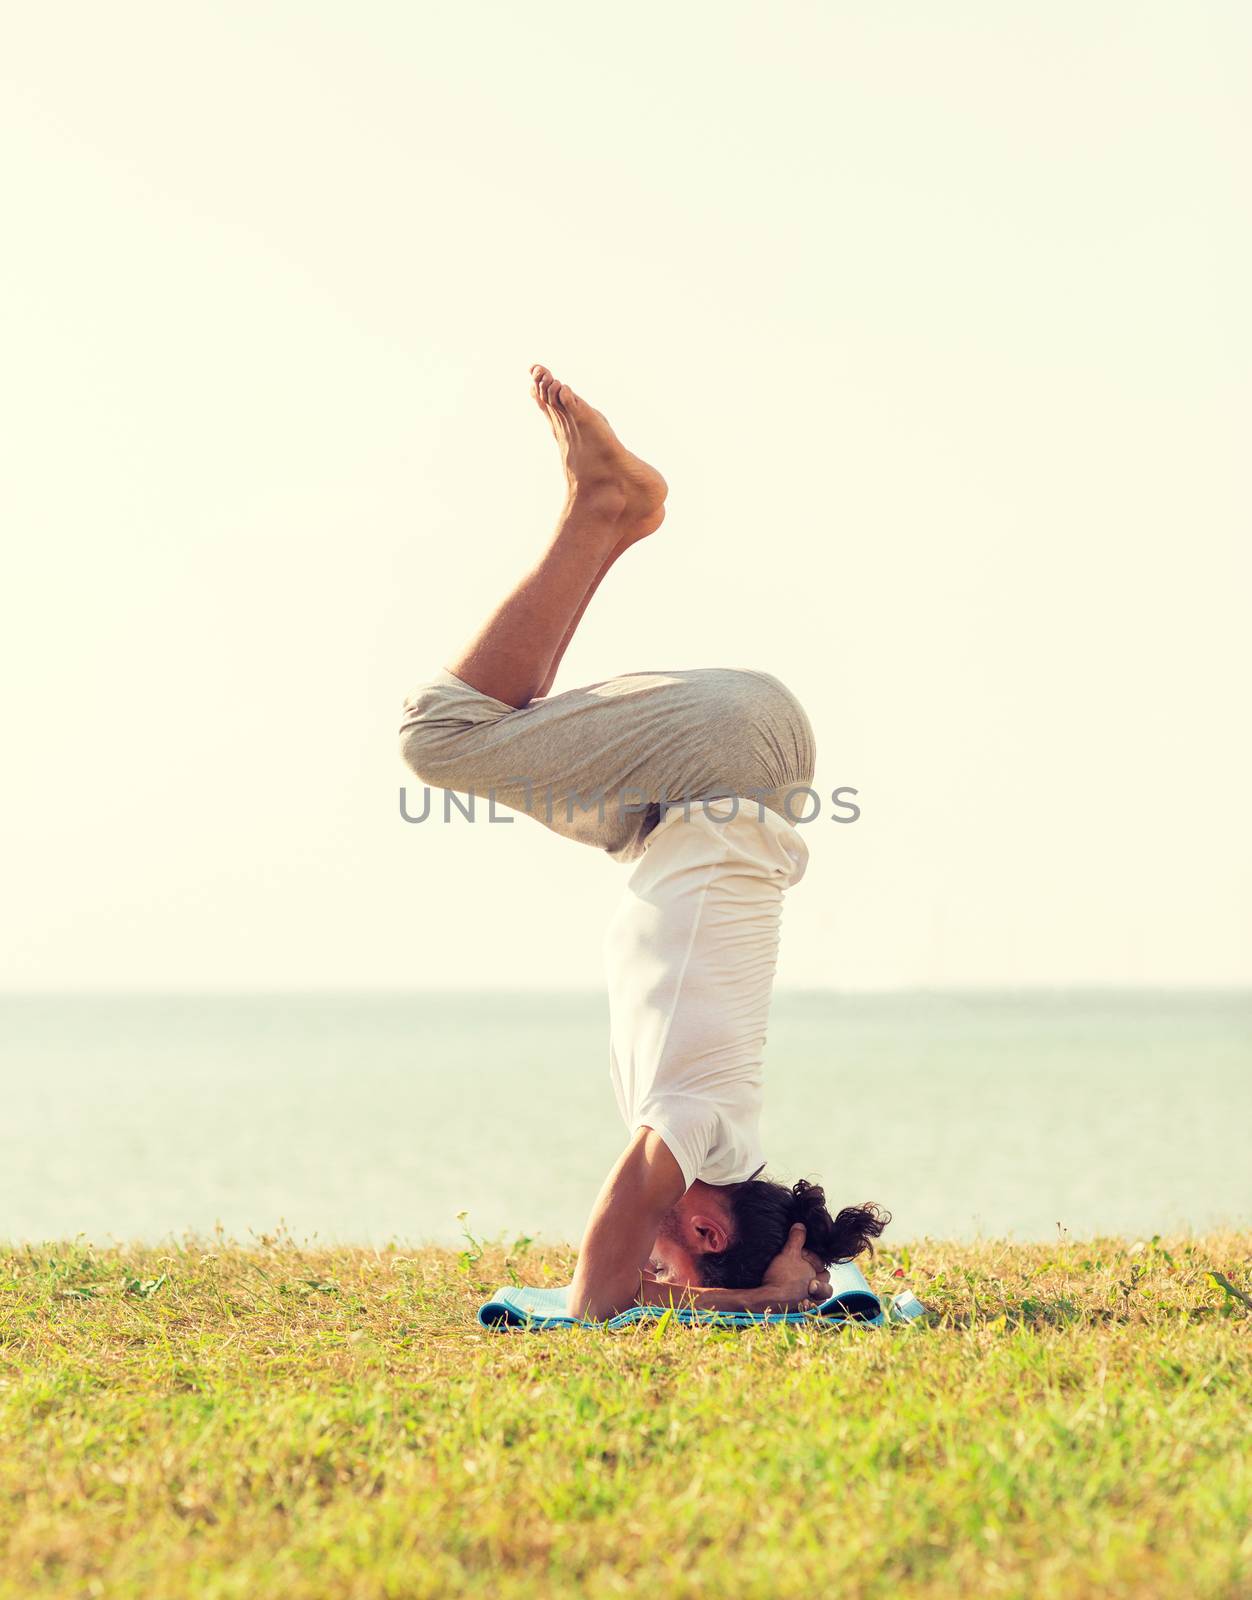 fitness, sport, people and lifestyle concept - man making yoga exercises on sand outdoors